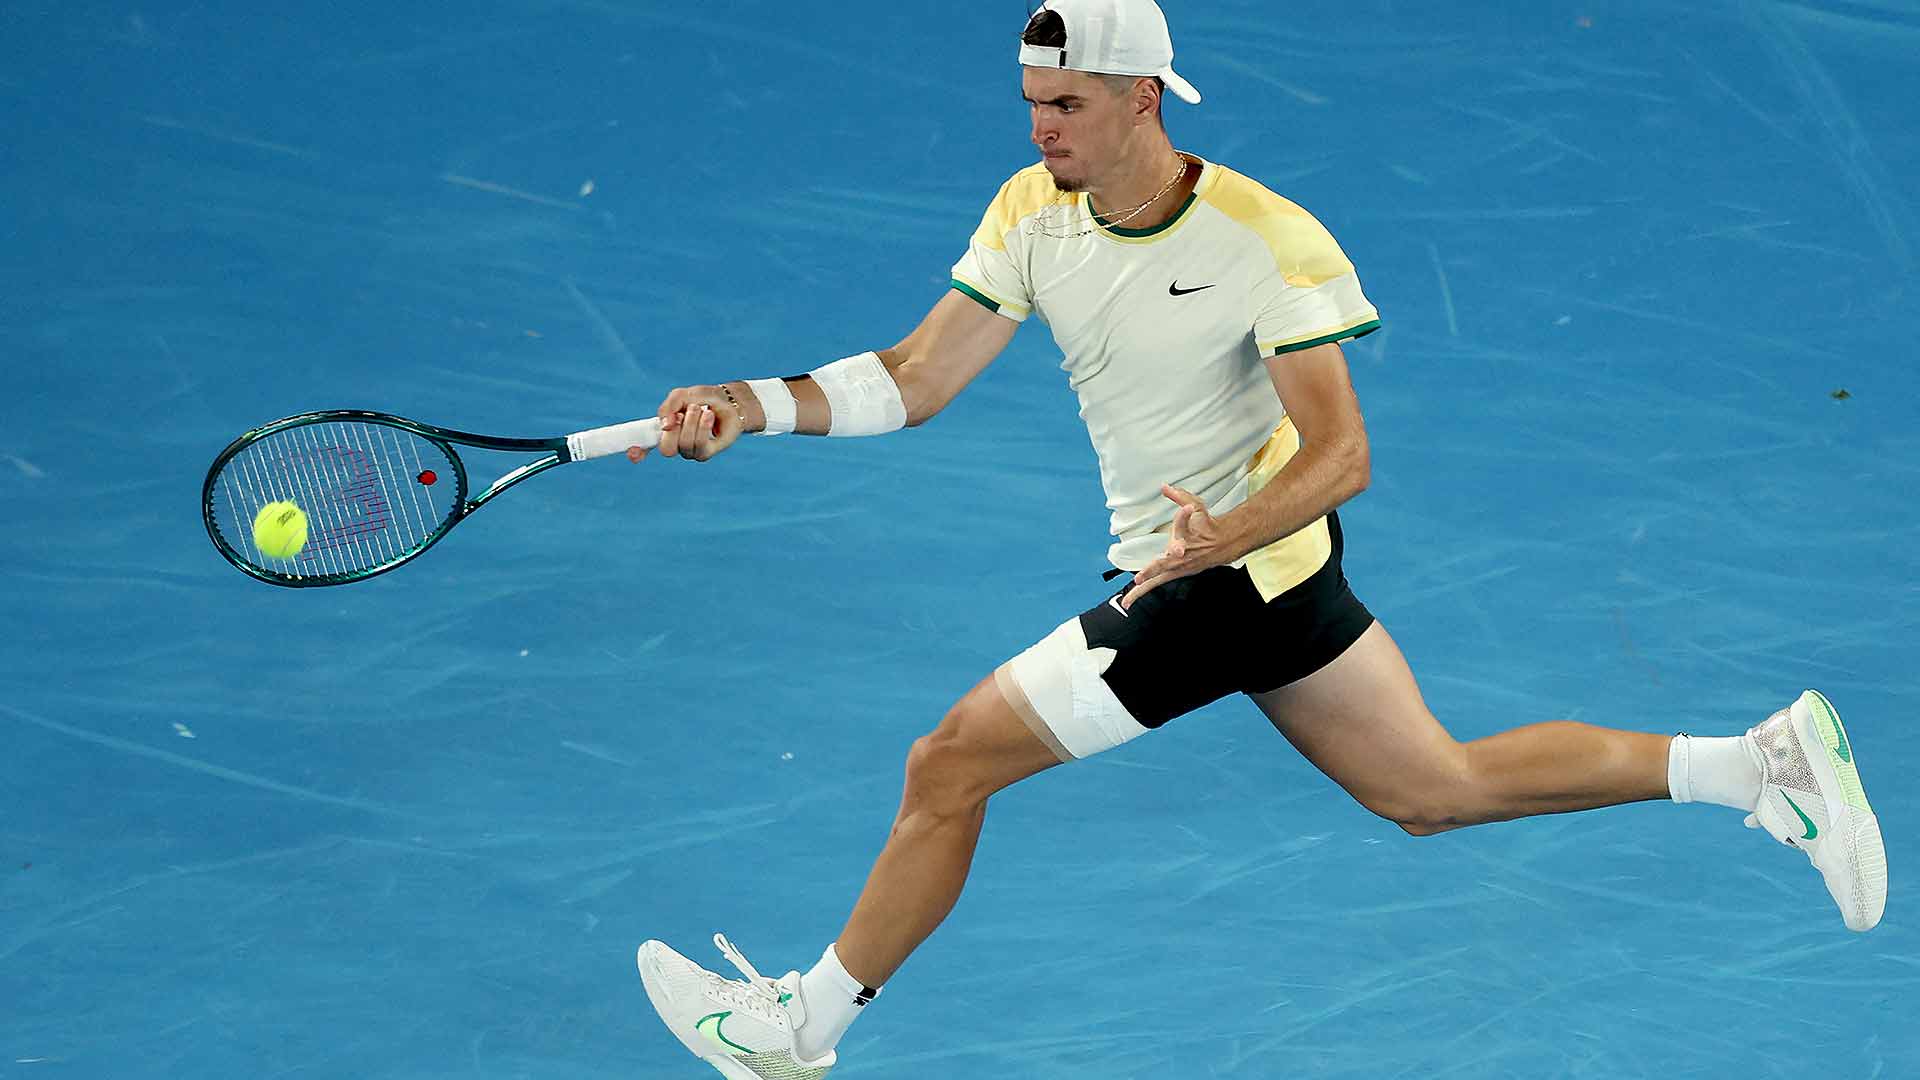 <a href='https://www.atptour.com/en/players/dino-prizmic/p0hw/overview'>Dino Prizmic</a> impressed in his Grand Slam debut against <a href='https://www.atptour.com/en/players/novak-djokovic/d643/overview'>Novak Djokovic</a>.